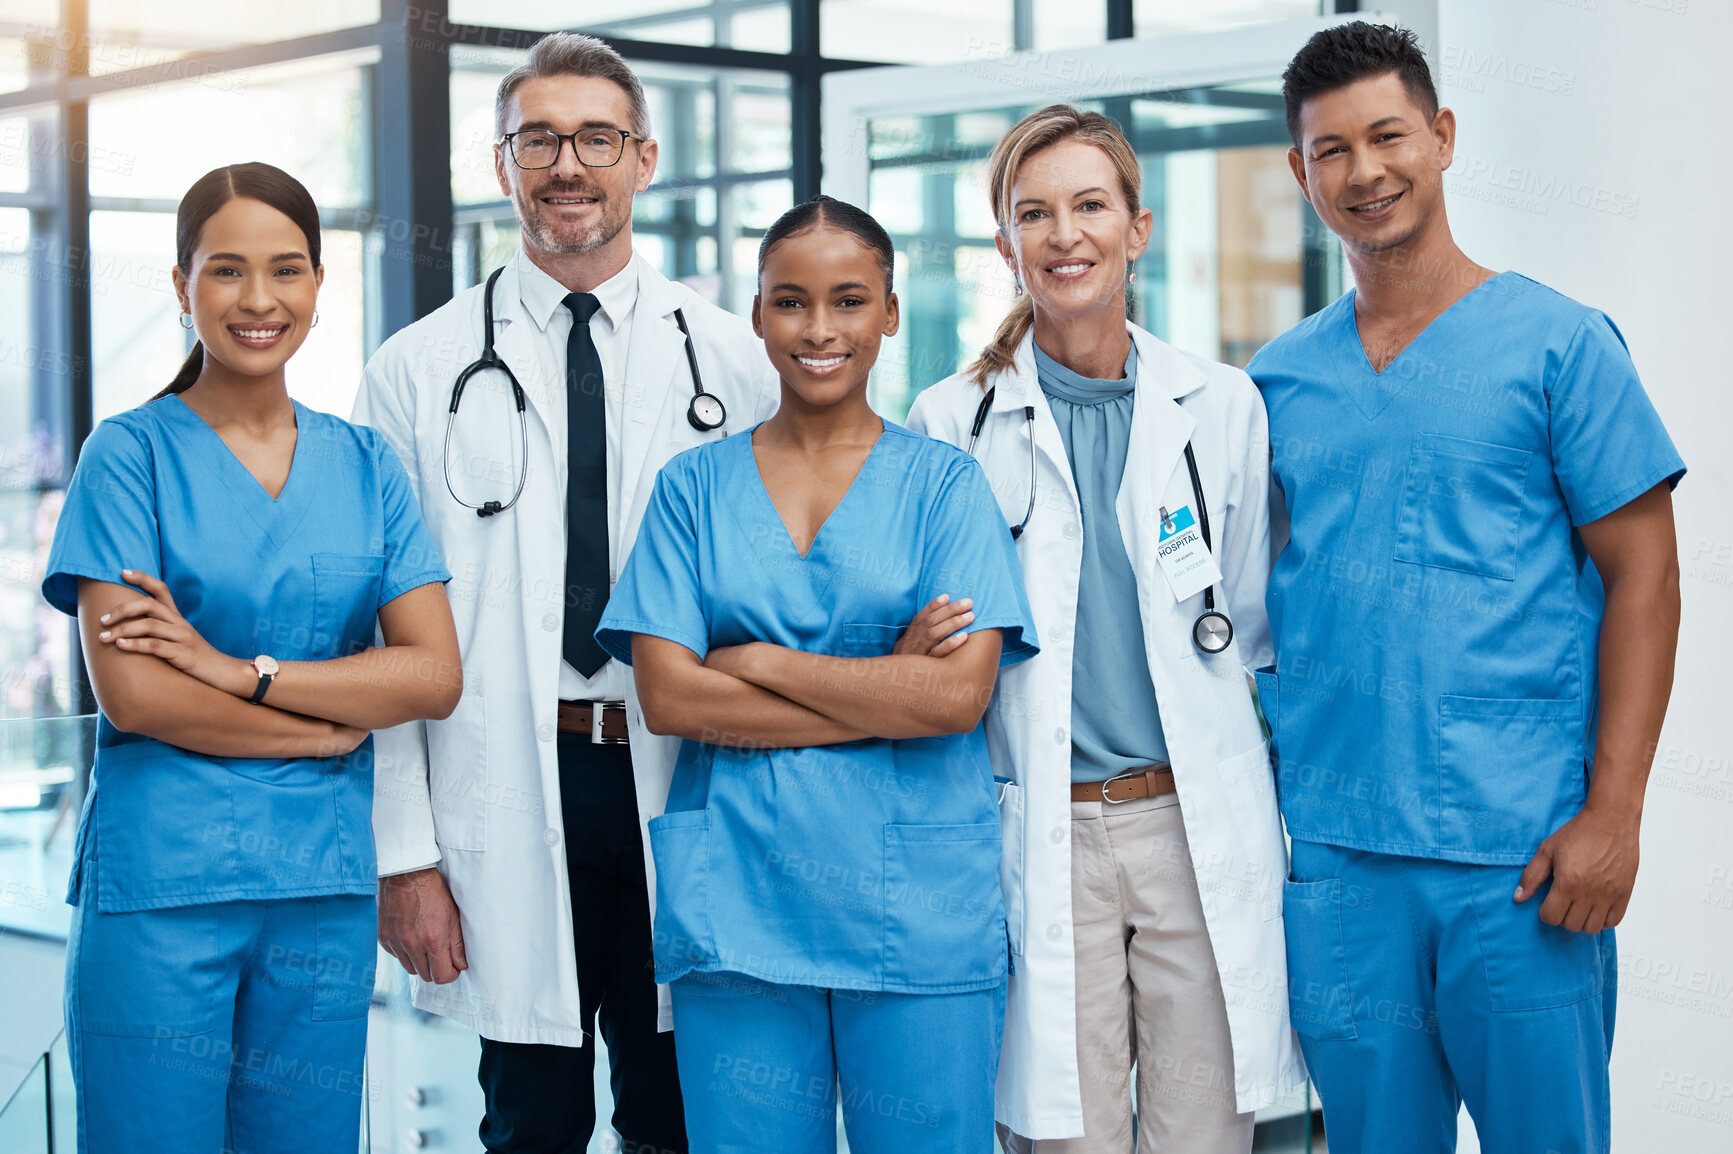 Buy stock photo Happy doctors and nurse smile at a hospital with support, teamwork and collaboration with diversity. Team of expert medical professionals smiling at work together at clinic in the healthcare industry